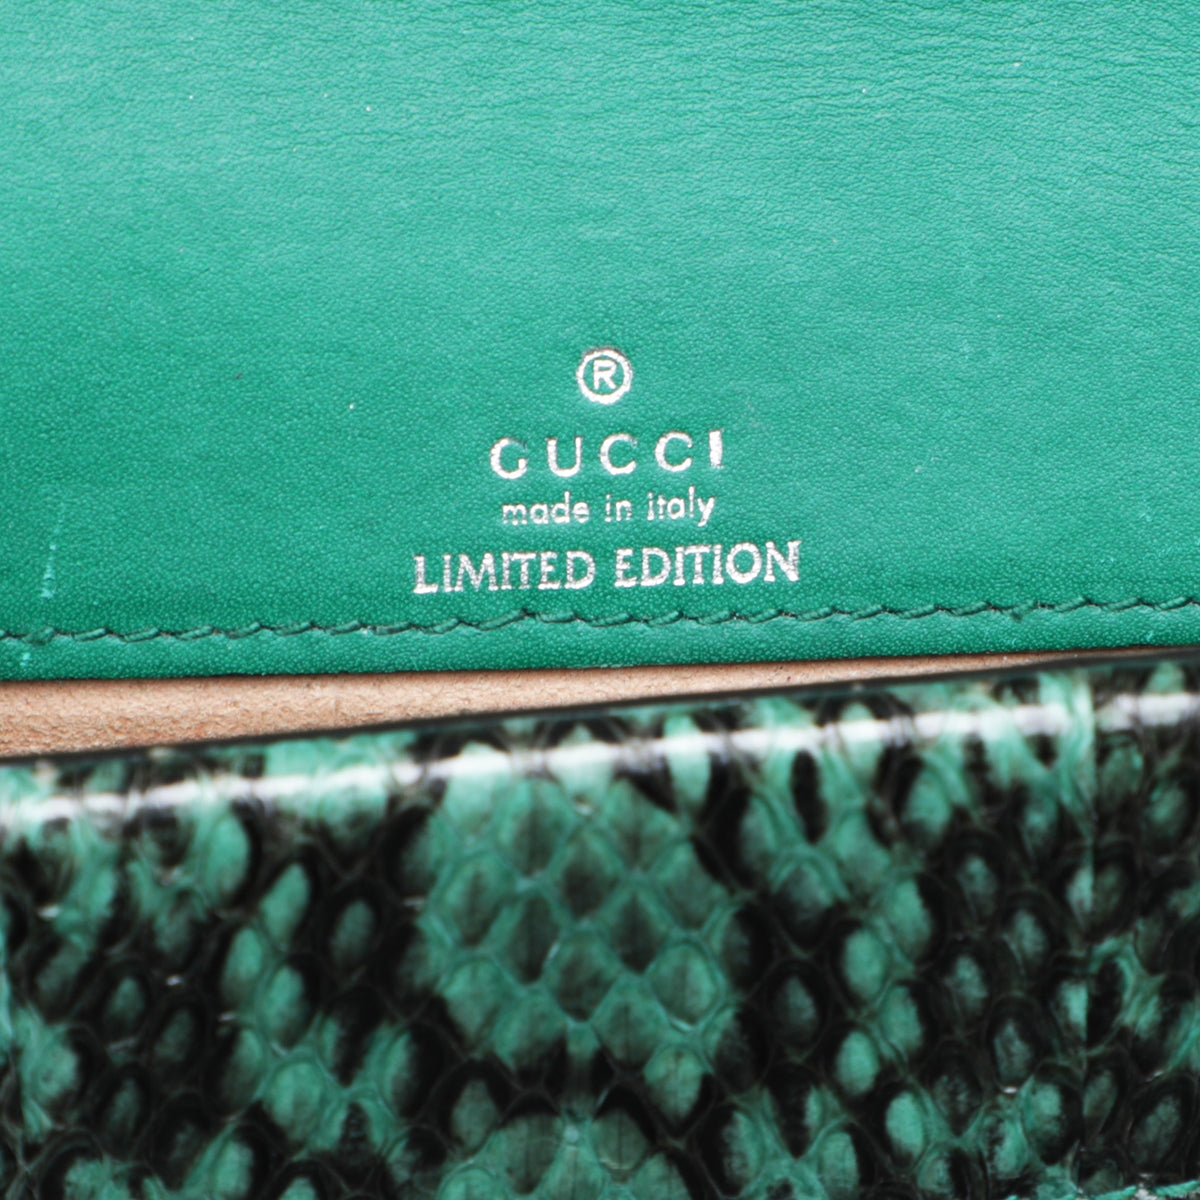 Comparing Gucci Dionysus Wallet on a Chain and Small Shoulder Bag 